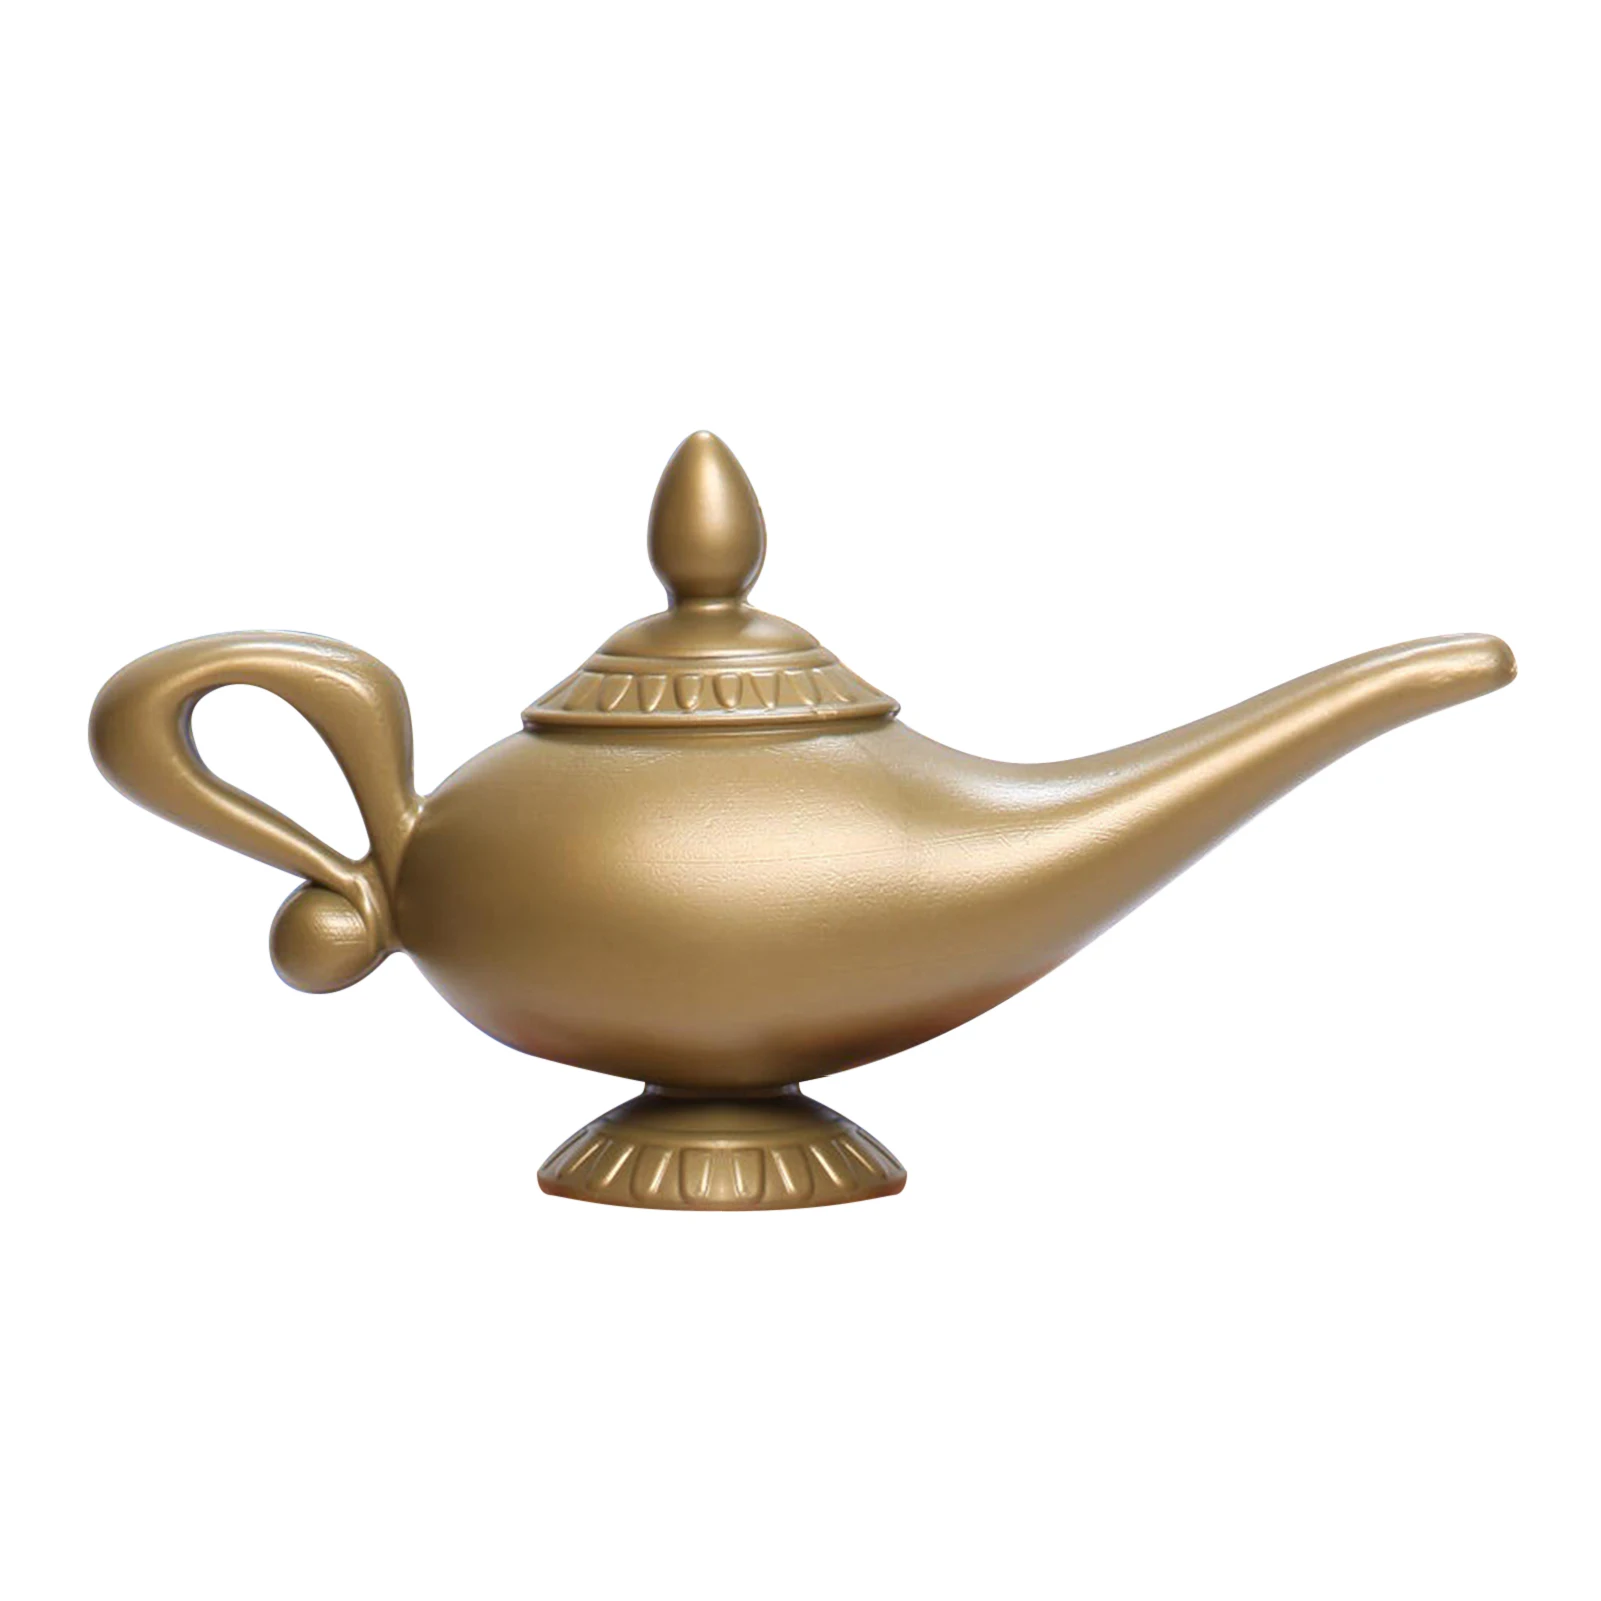 Genie Lamp Costume Accessories For Halloween Party Halloween Costume Accessories Birthday Beautiful Gift Toy For Women Girl